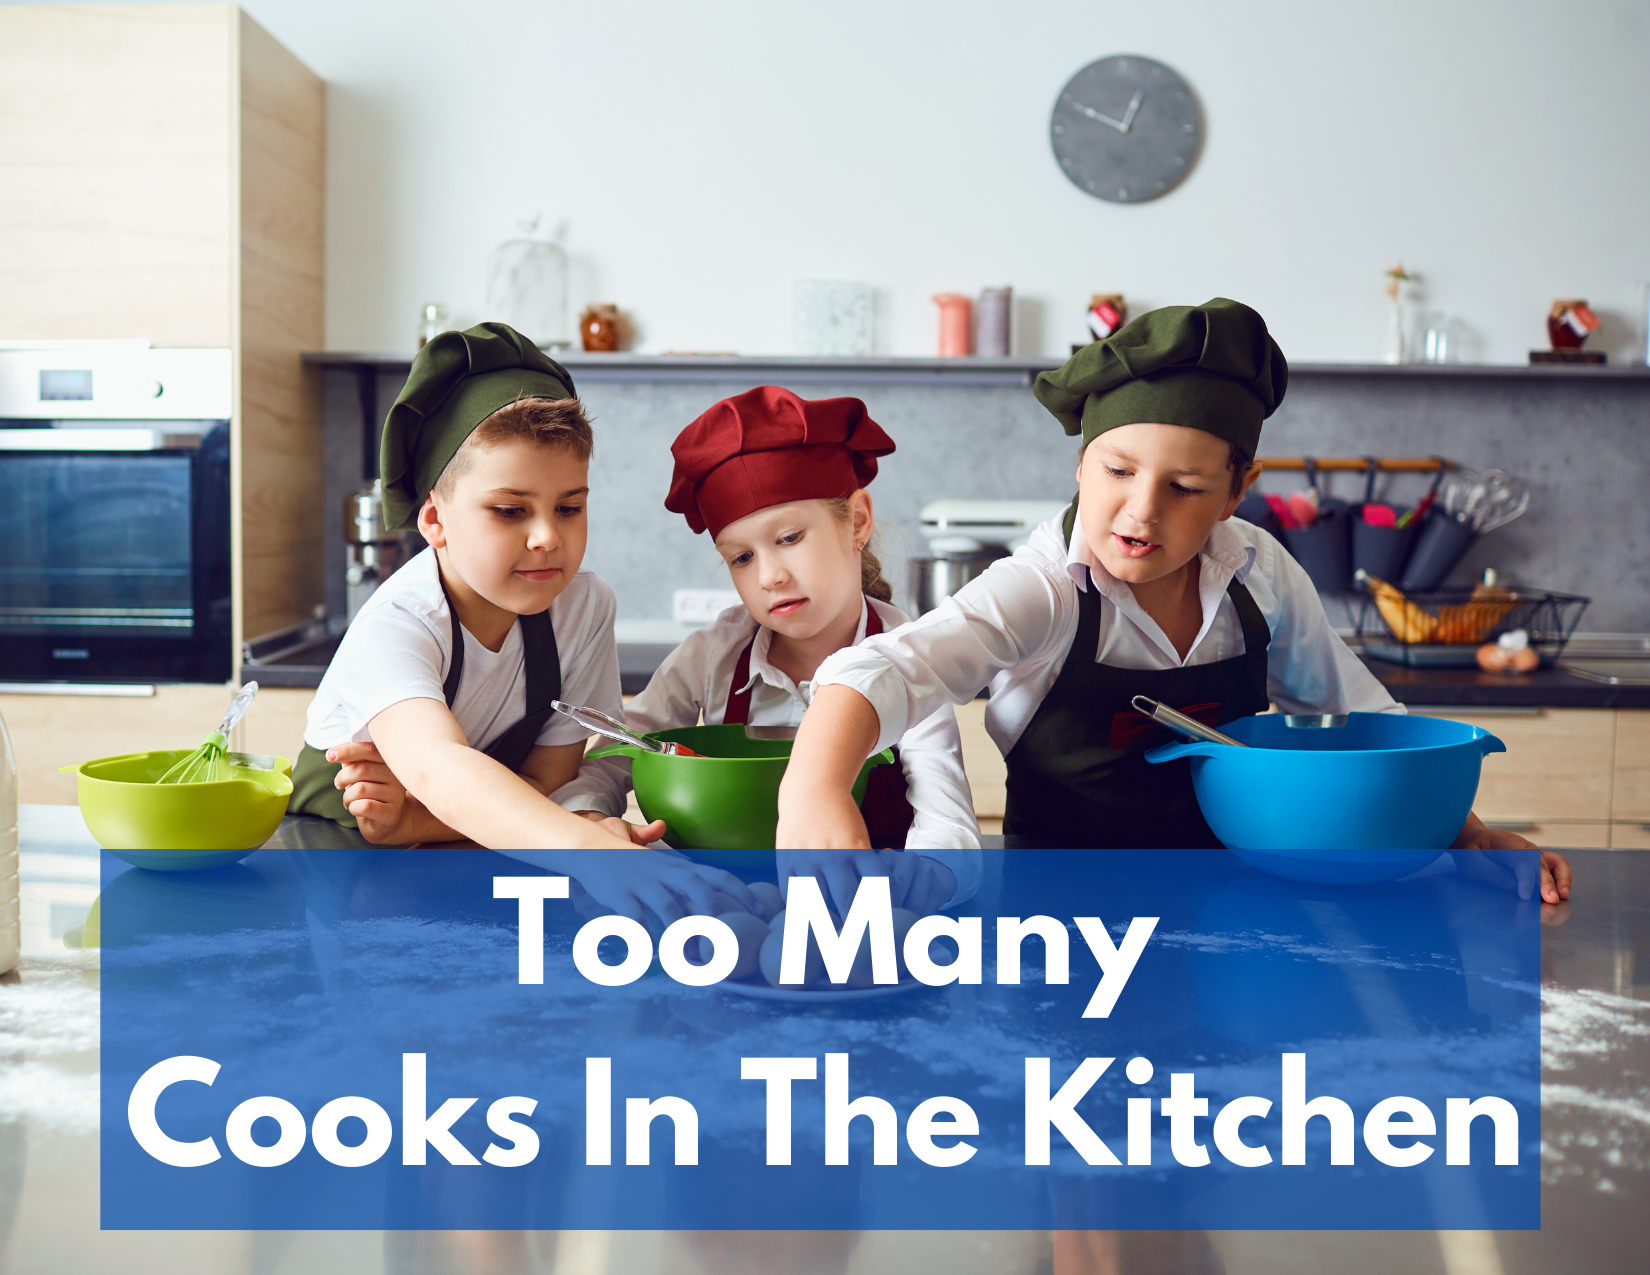 A picture of three children in cooking uniforms in the middle of a kitchen reaching for the same box of eggs, with the caption "Too many cooks in the kitchen."